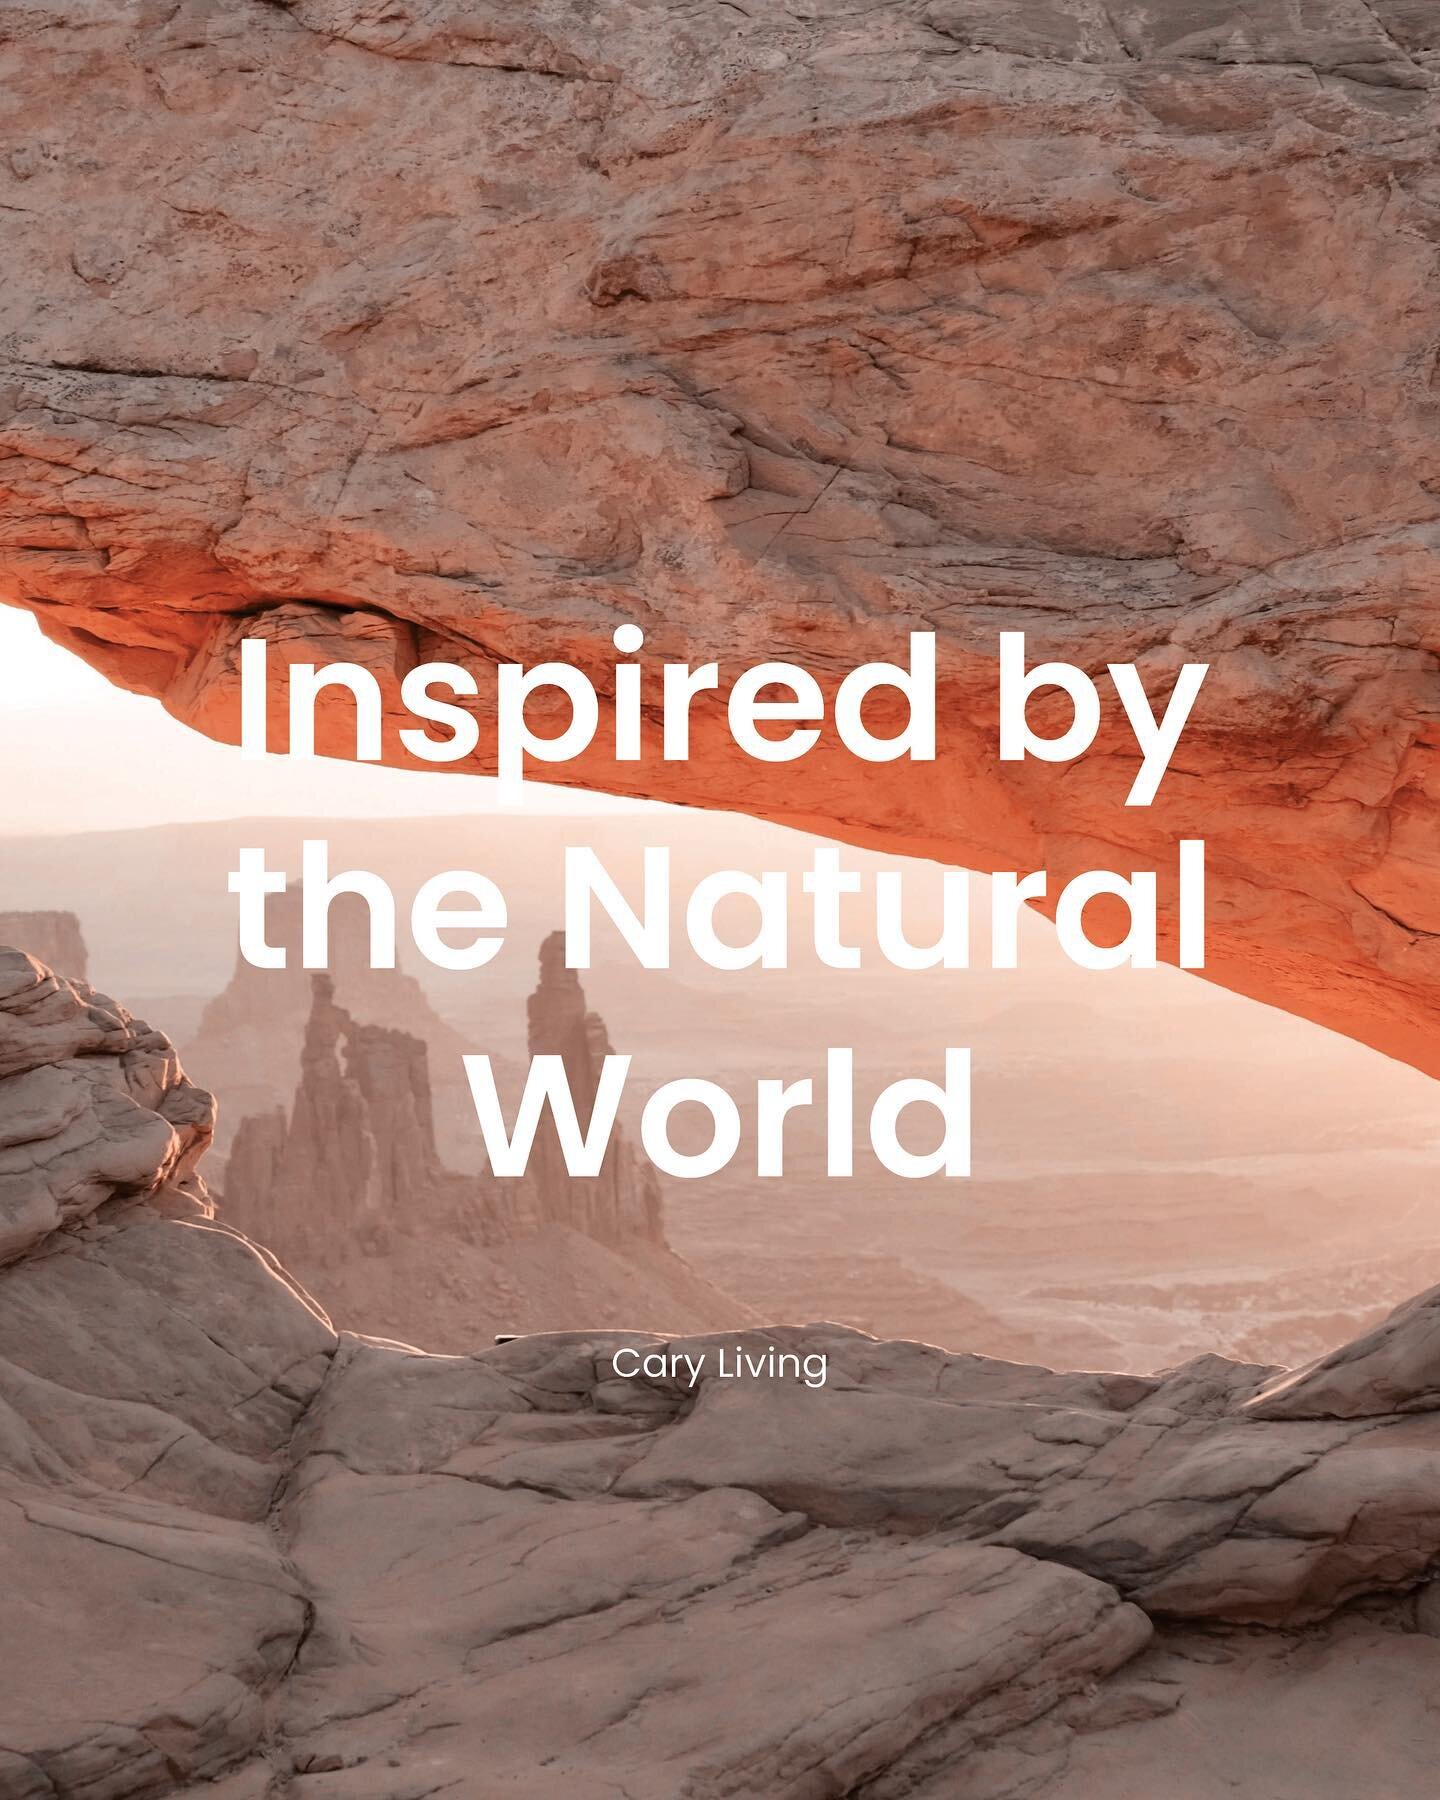 Like the natural world around us, we believe design has the power to soothe and inspire. Our designs are perfectly fit to your space, using natural materials that bring a sense of calm, peace, and balance into your home 💫

#inspiredbynature #thecary